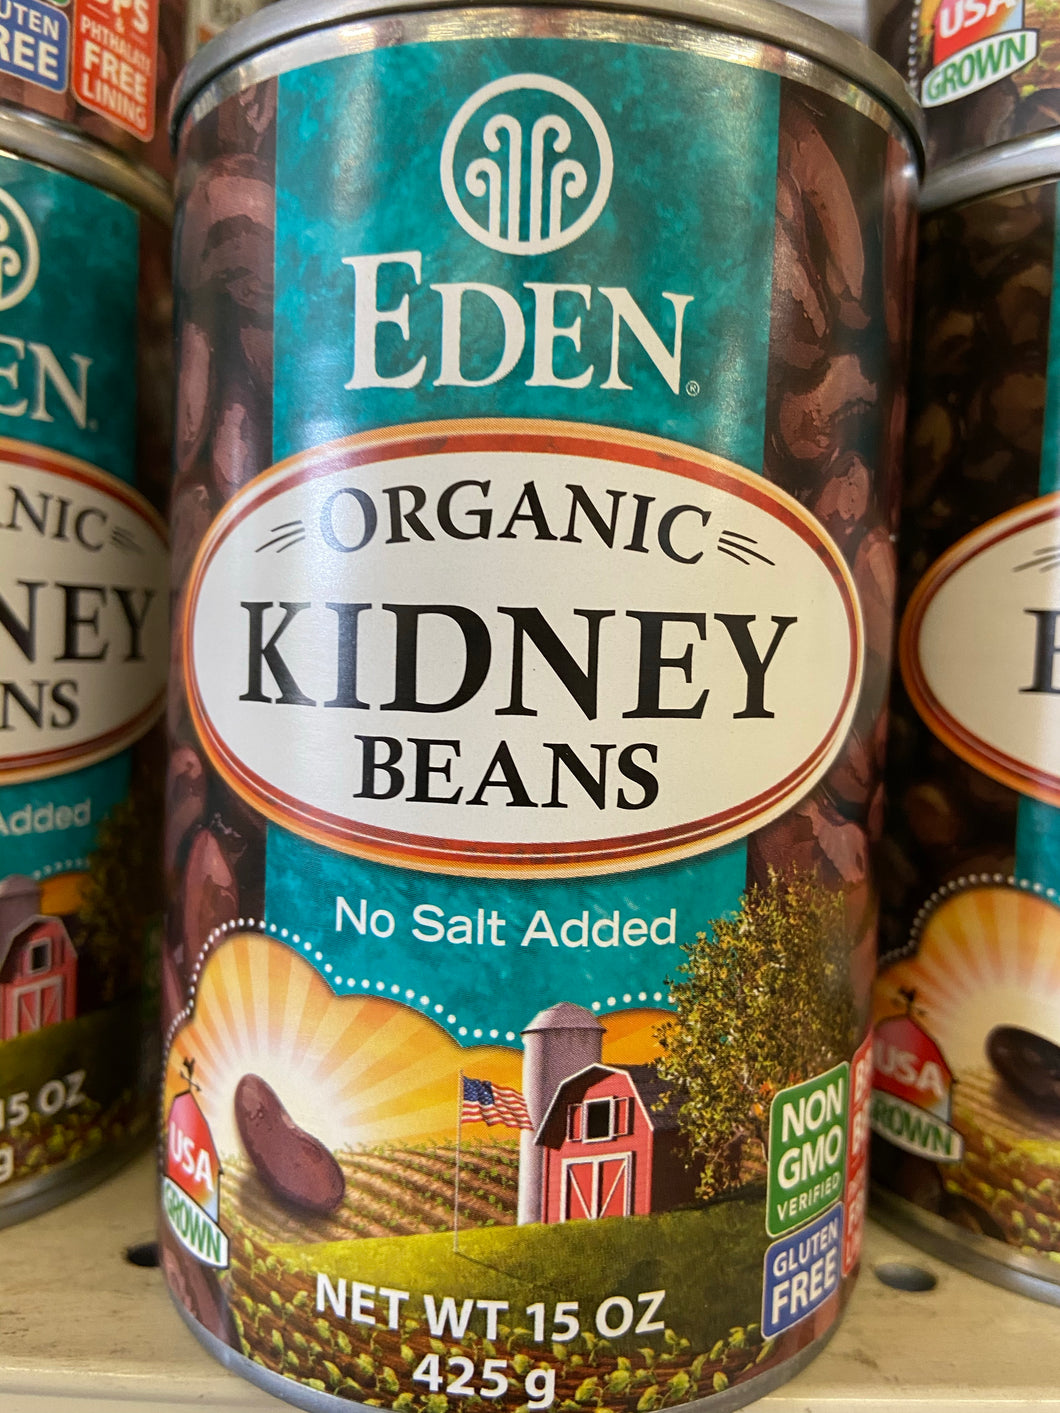 Beans Canned, Red Kidney, Eden Organic